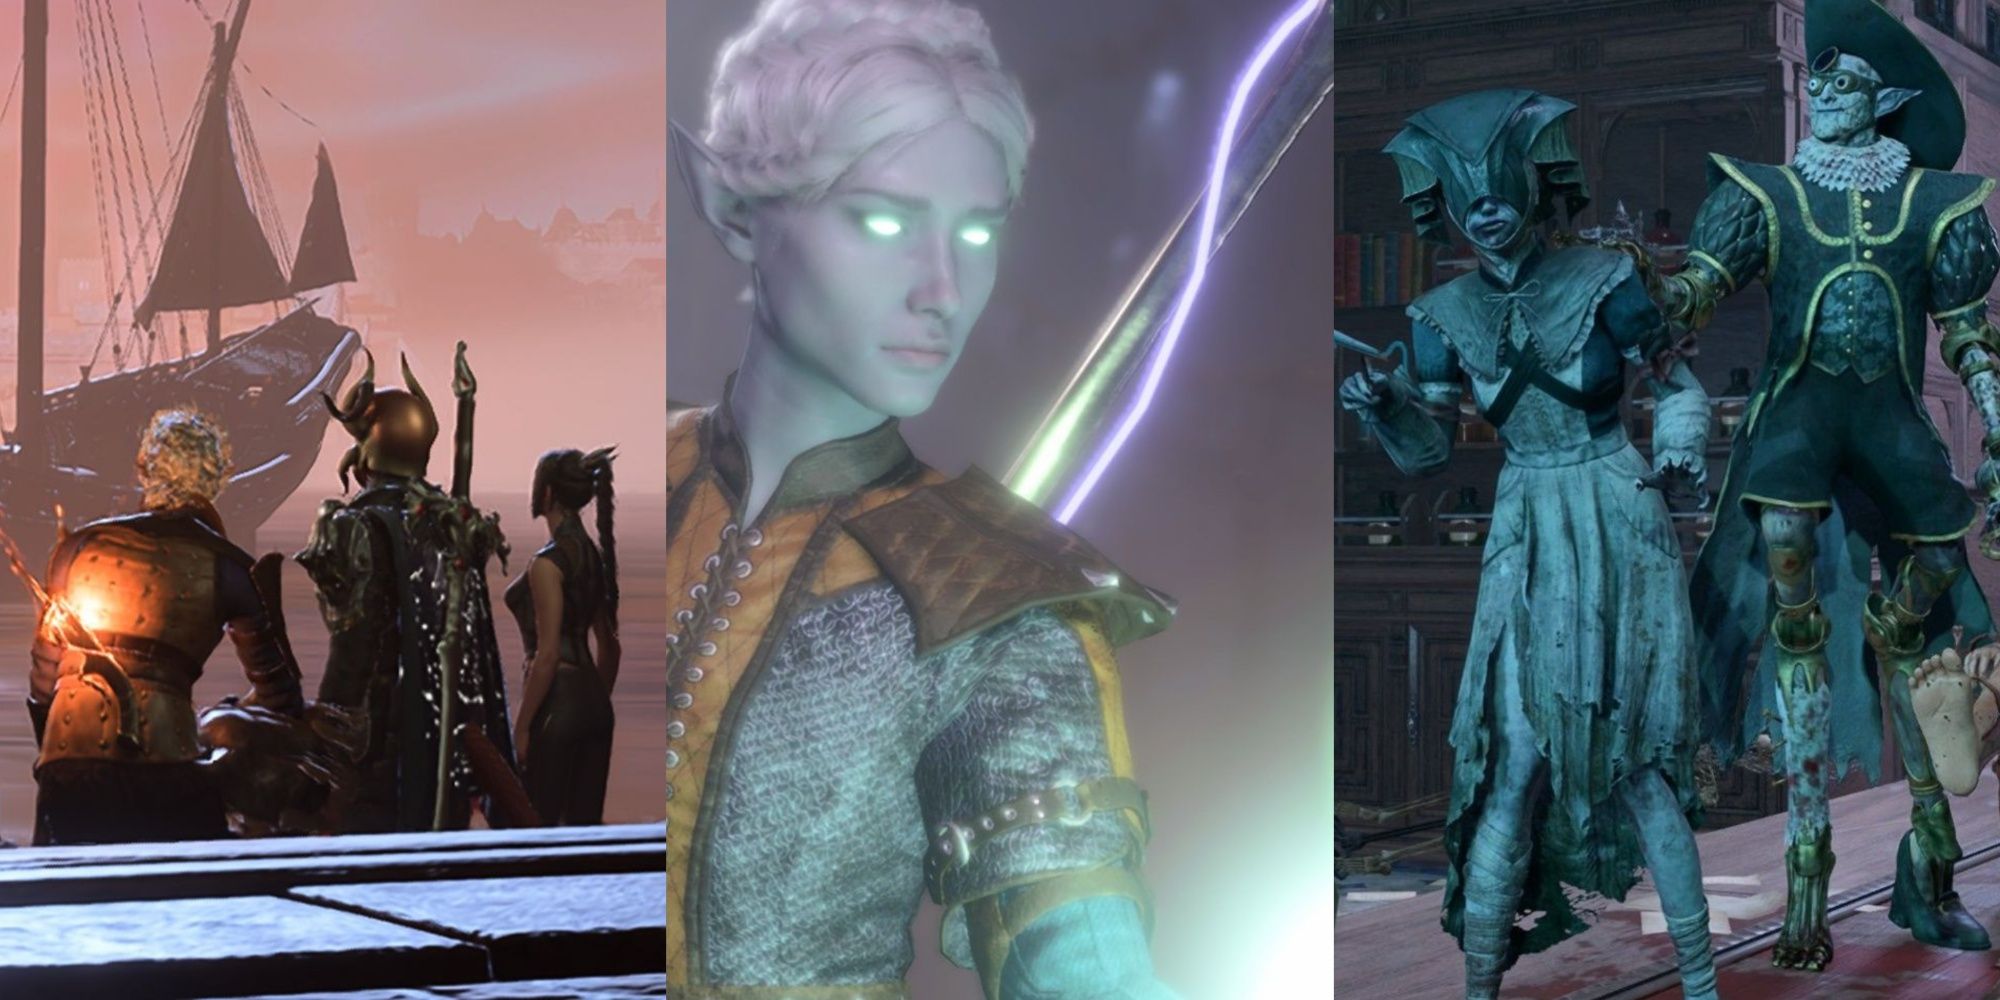 Split images of the BG3 party looking at a sunset, Cleric casting Speak With Dead, and Malus Throrm and his assistants in the House of Healing in Baldur’s Gate 3.